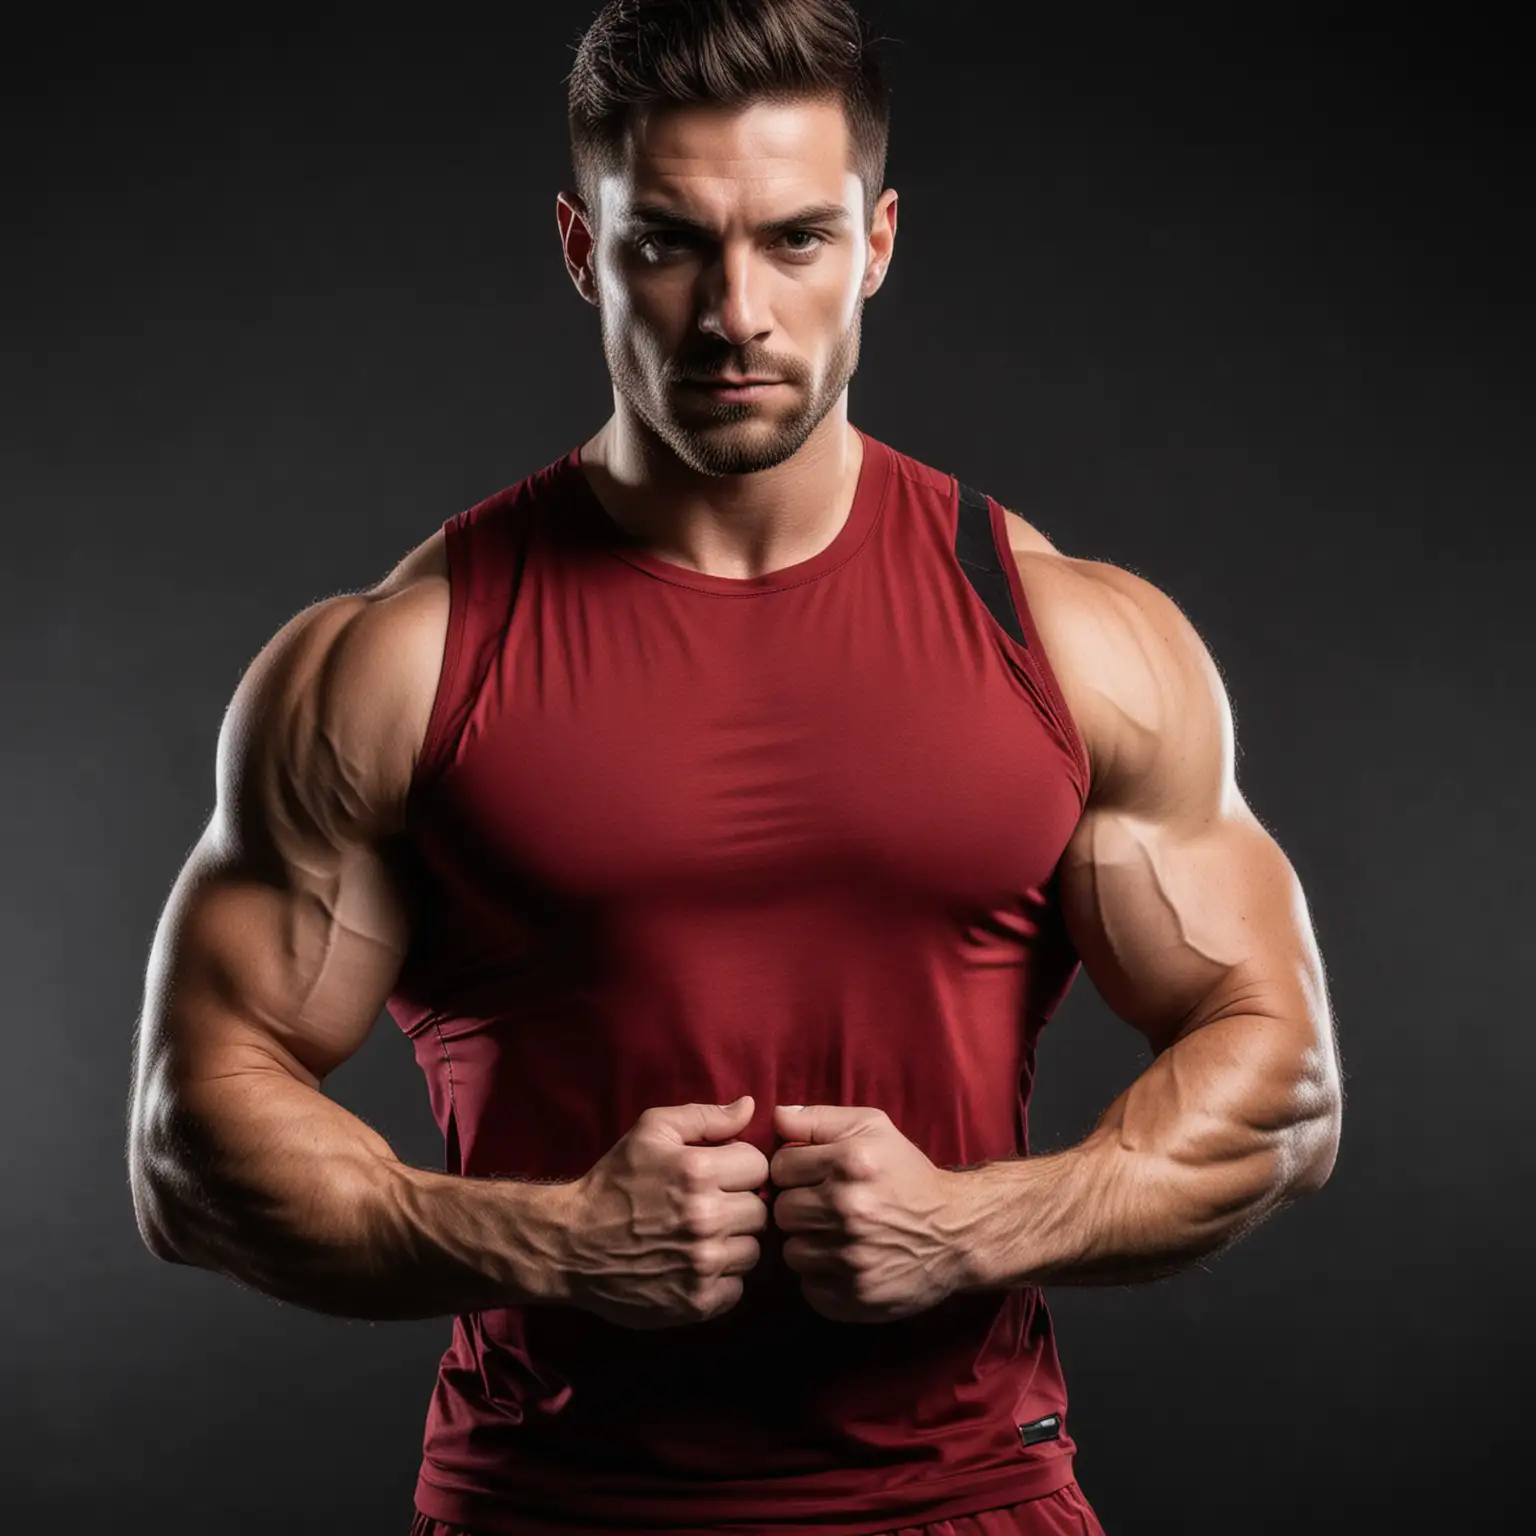 gym recovery man wearing dark red with black background